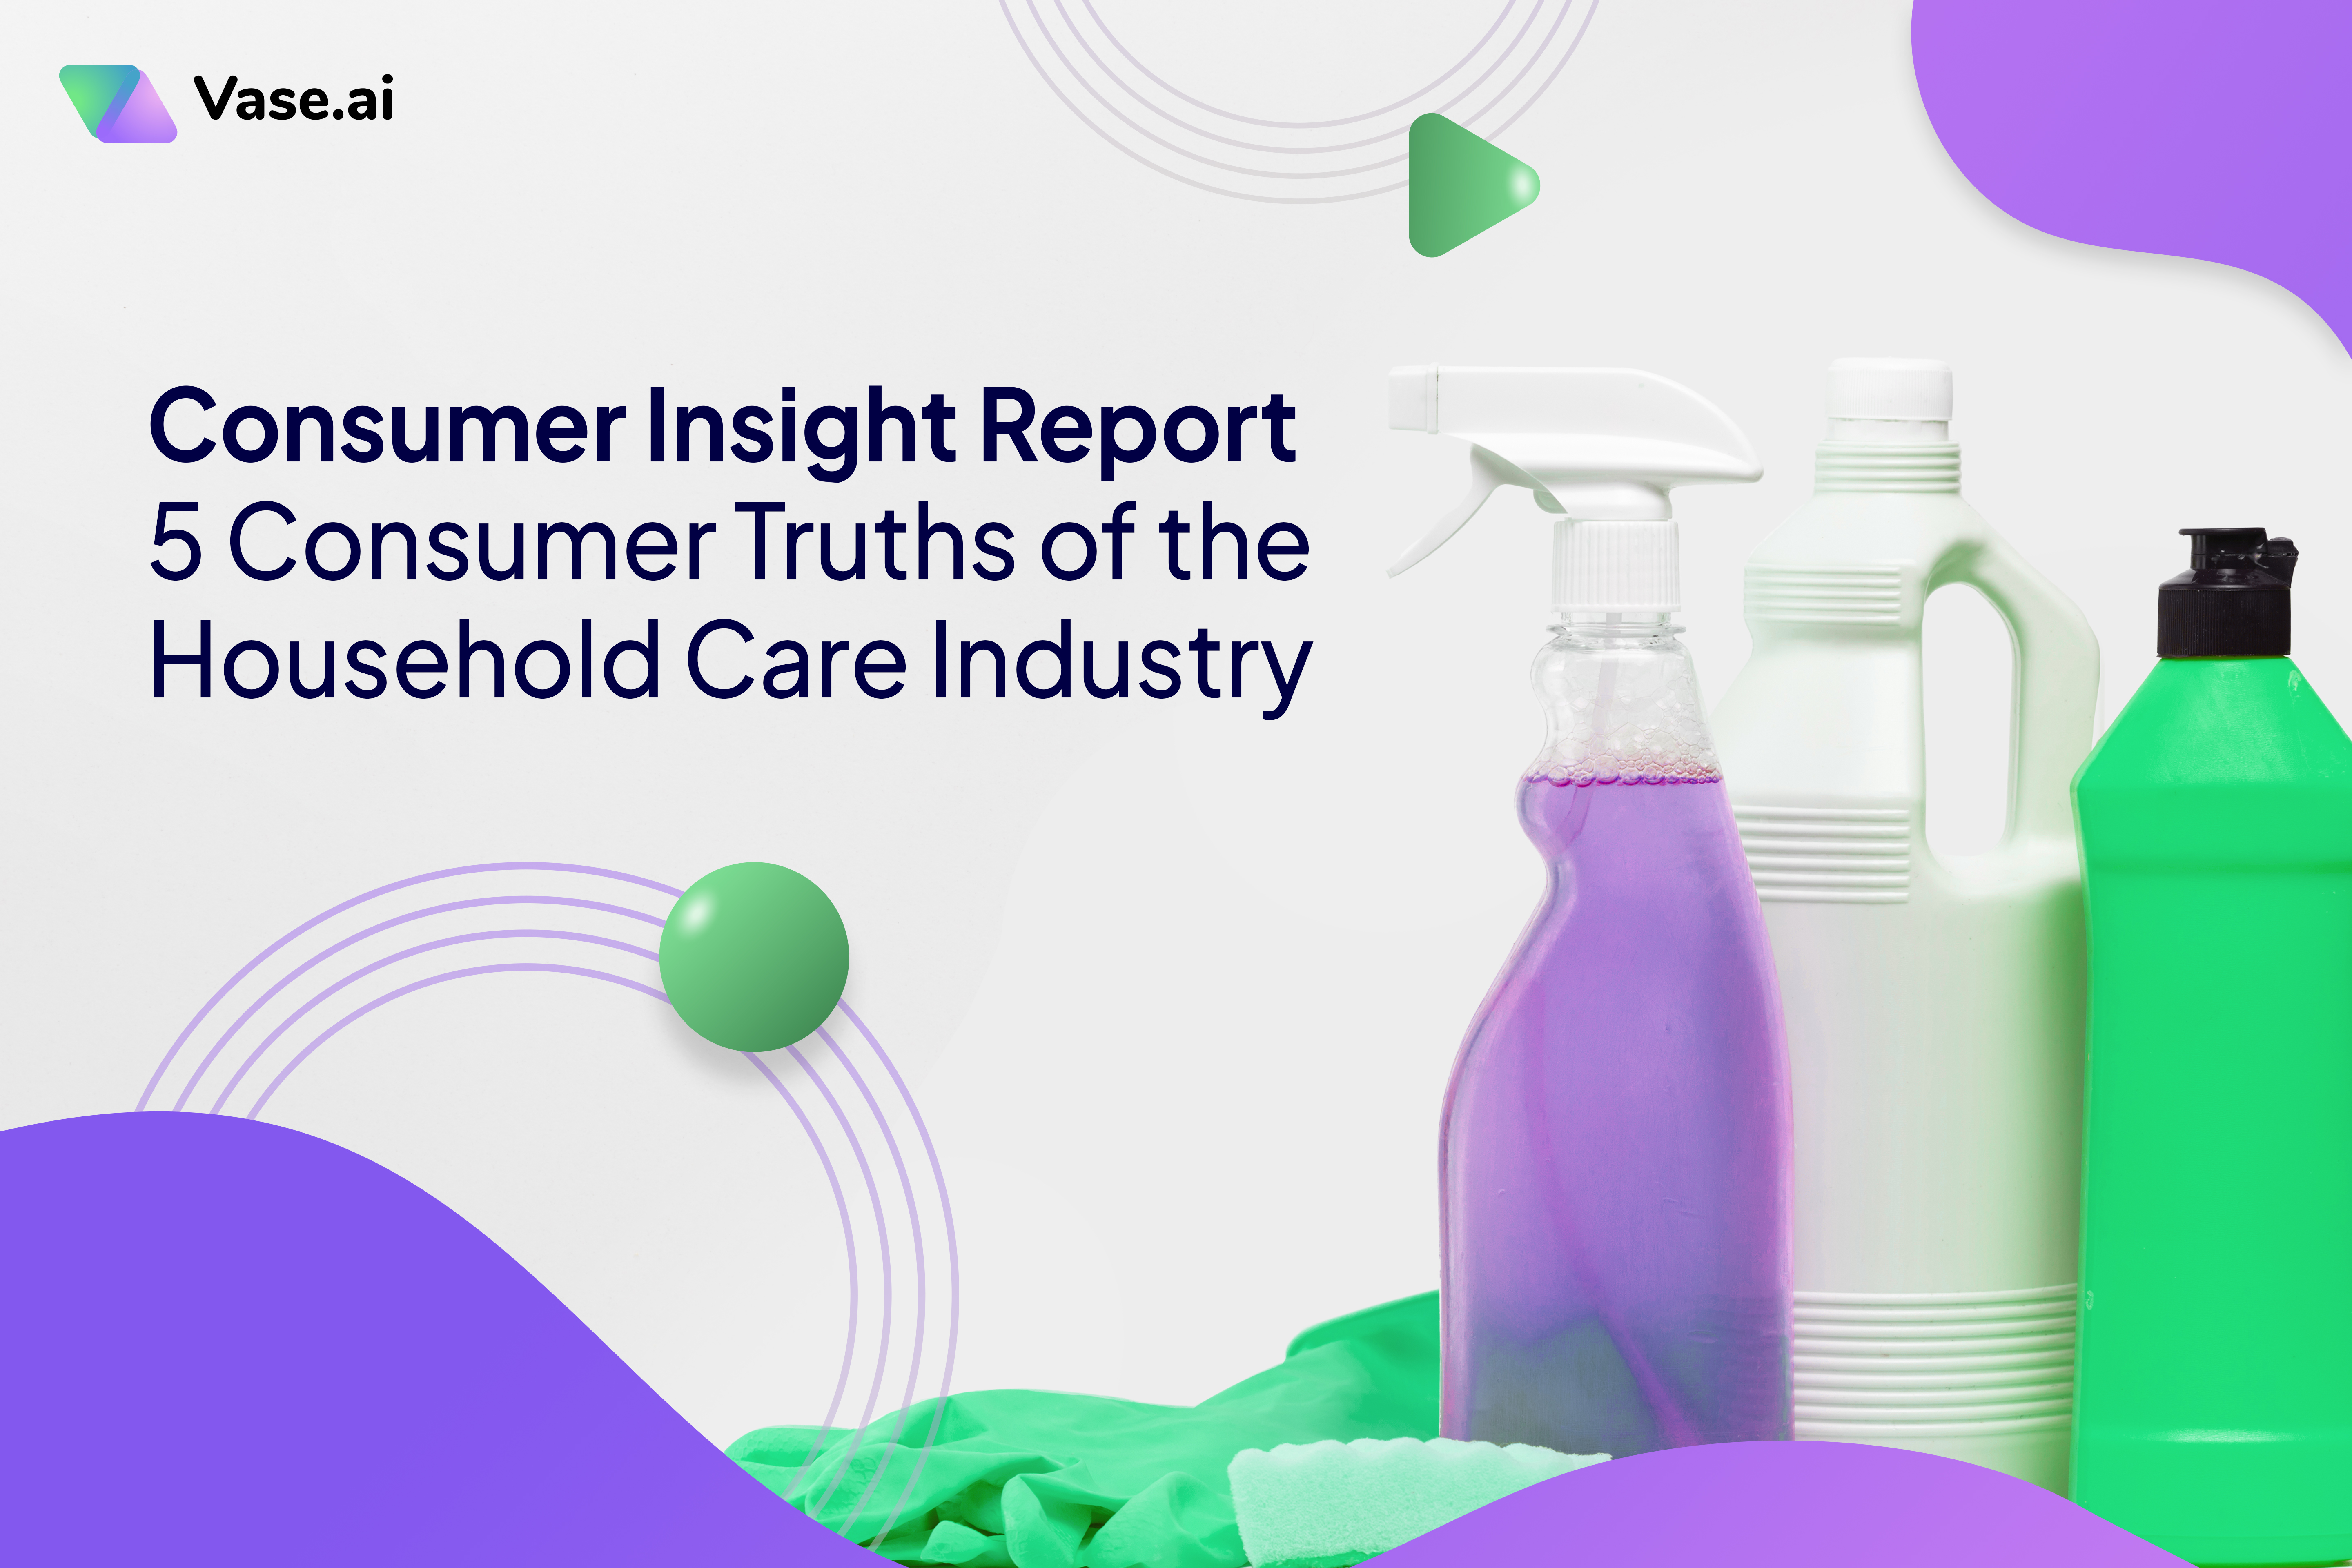 5 Consumer Truths of the Household Care Industry